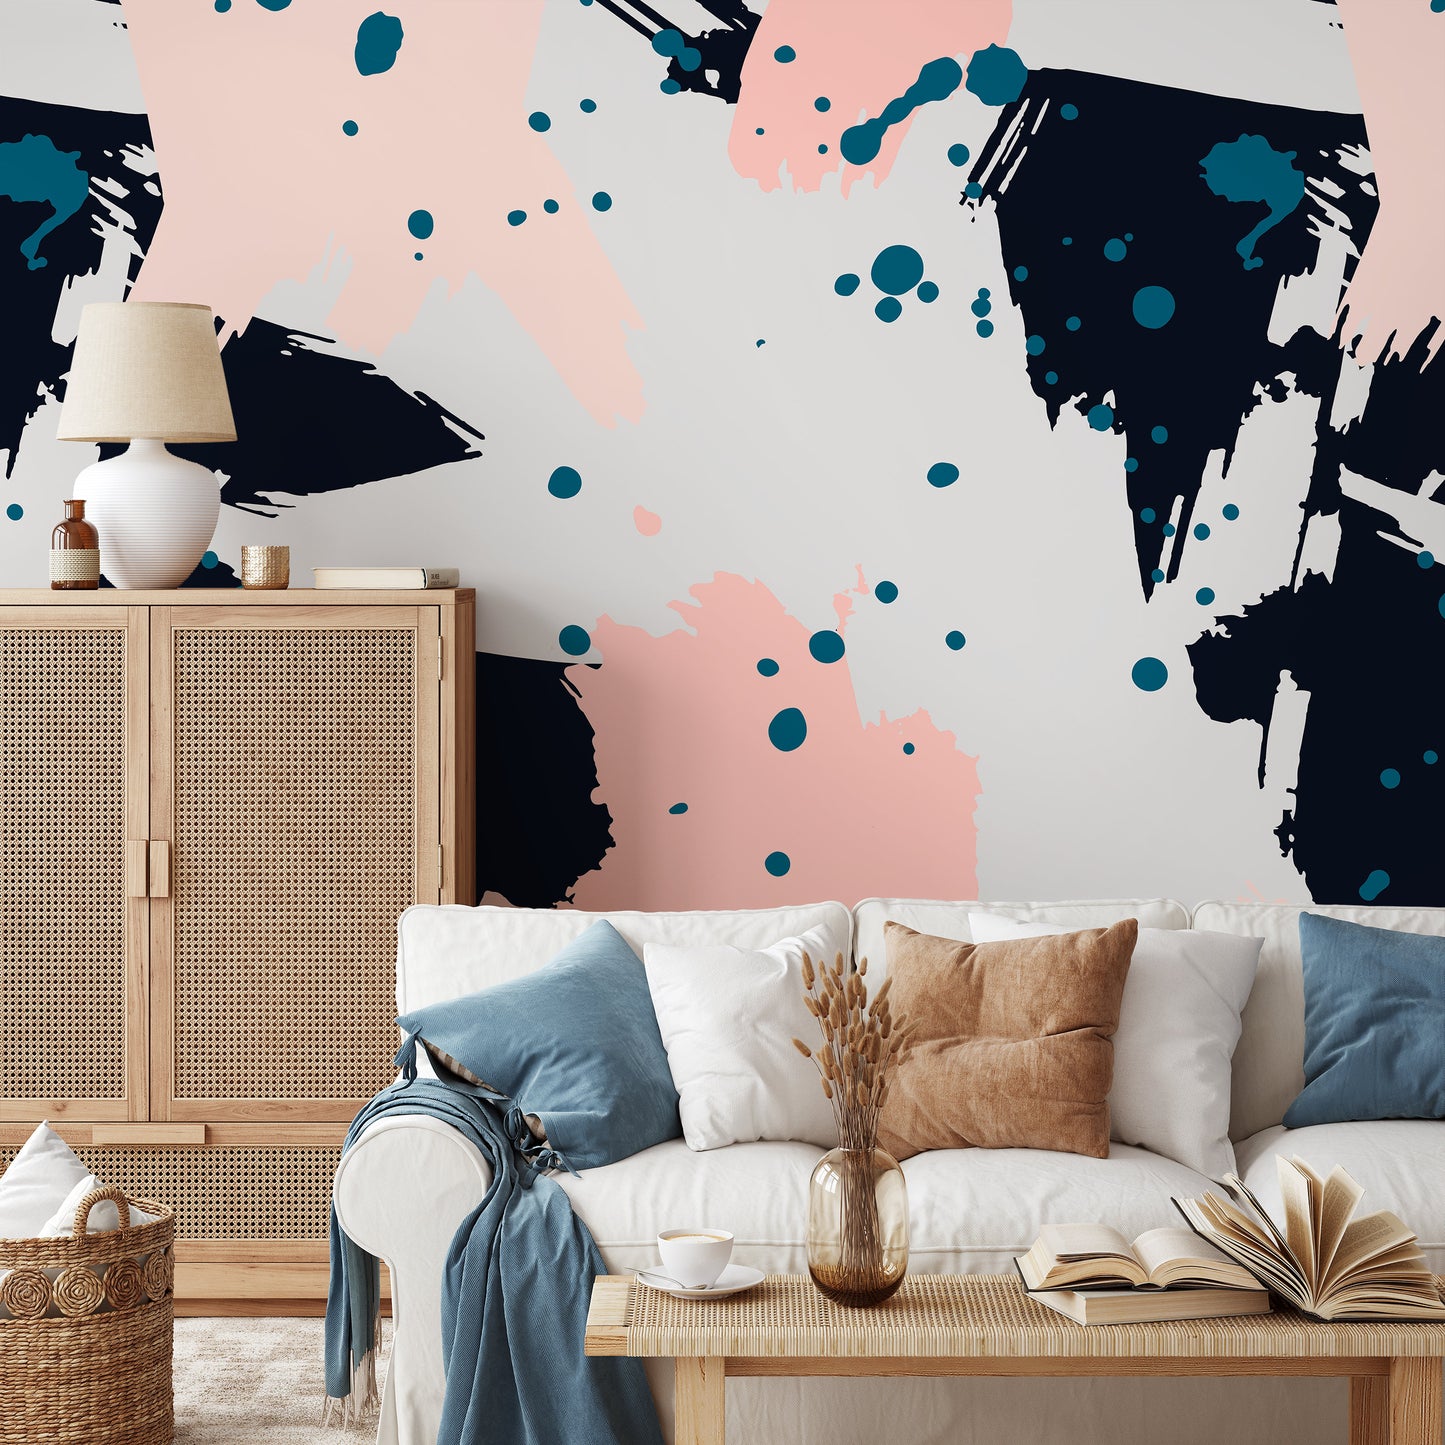 Wallpaper Peel and Stick Wallpaper Removable Wallpaper Home Decor Wall Art Wall Decor Room Decor / Abstract Brush Wallpaper - B263